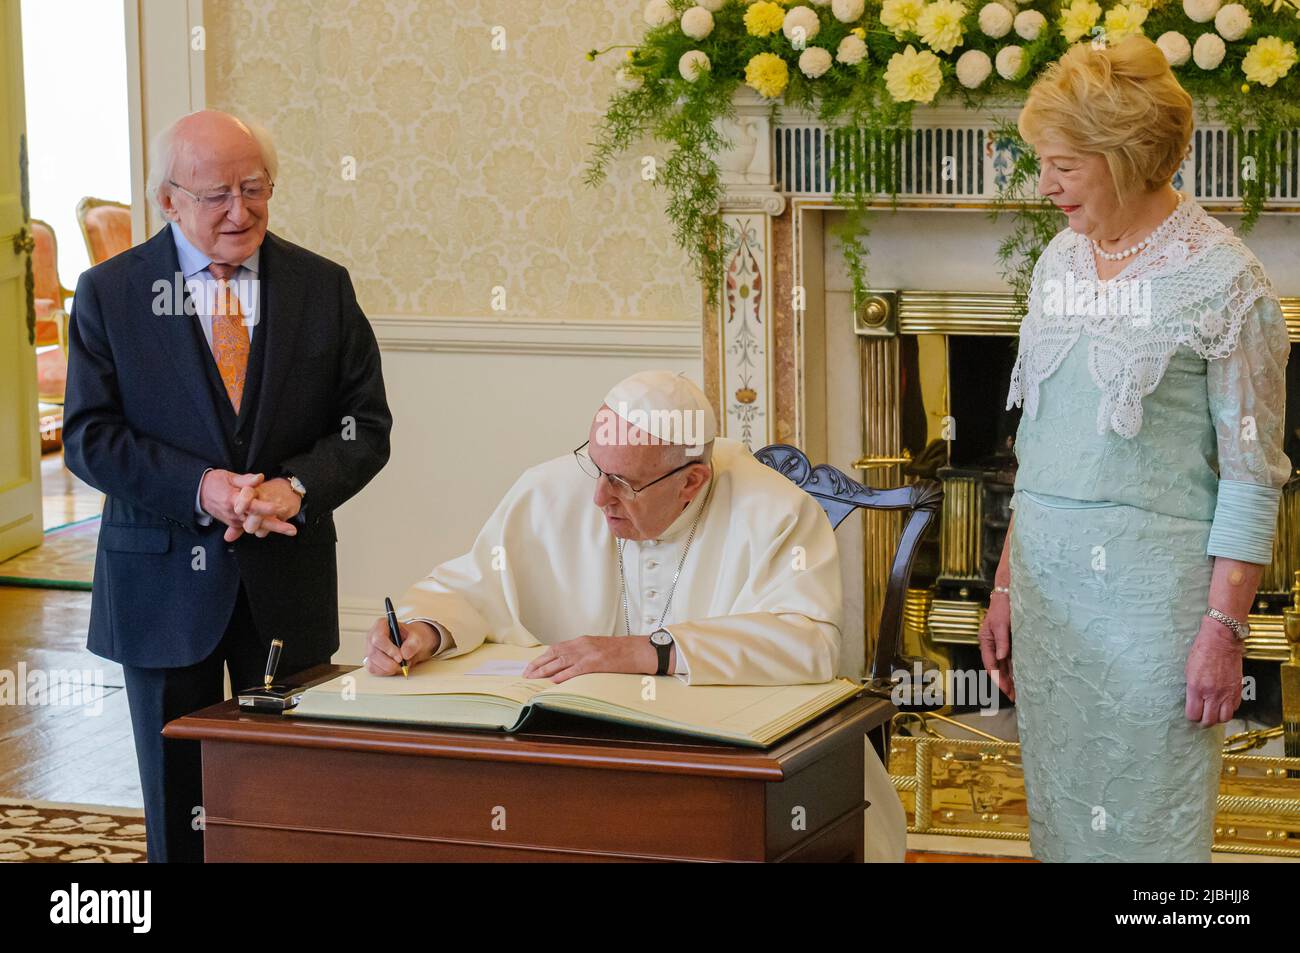 Dublin, Ireland. 26/08/2018 - Pope Francis signs the visitors' book, as Michael D Higgins, and Sabina Higgins look on in the Aras An Uachtarain, Dublin, Republic of Ireland Stock Photo